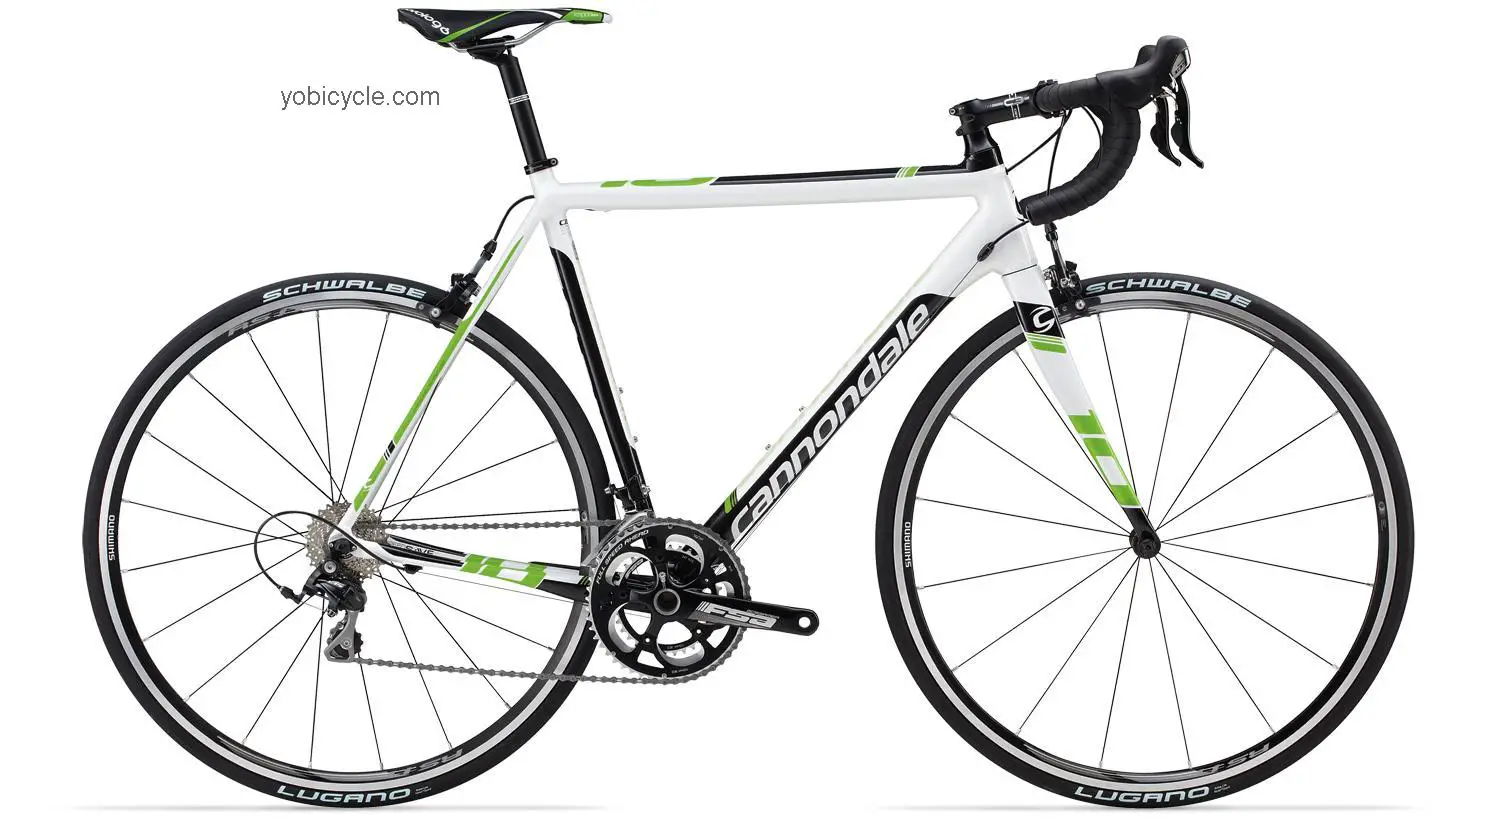 Cannondale CAAD10 5 105 Compact competitors and comparison tool online specs and performance